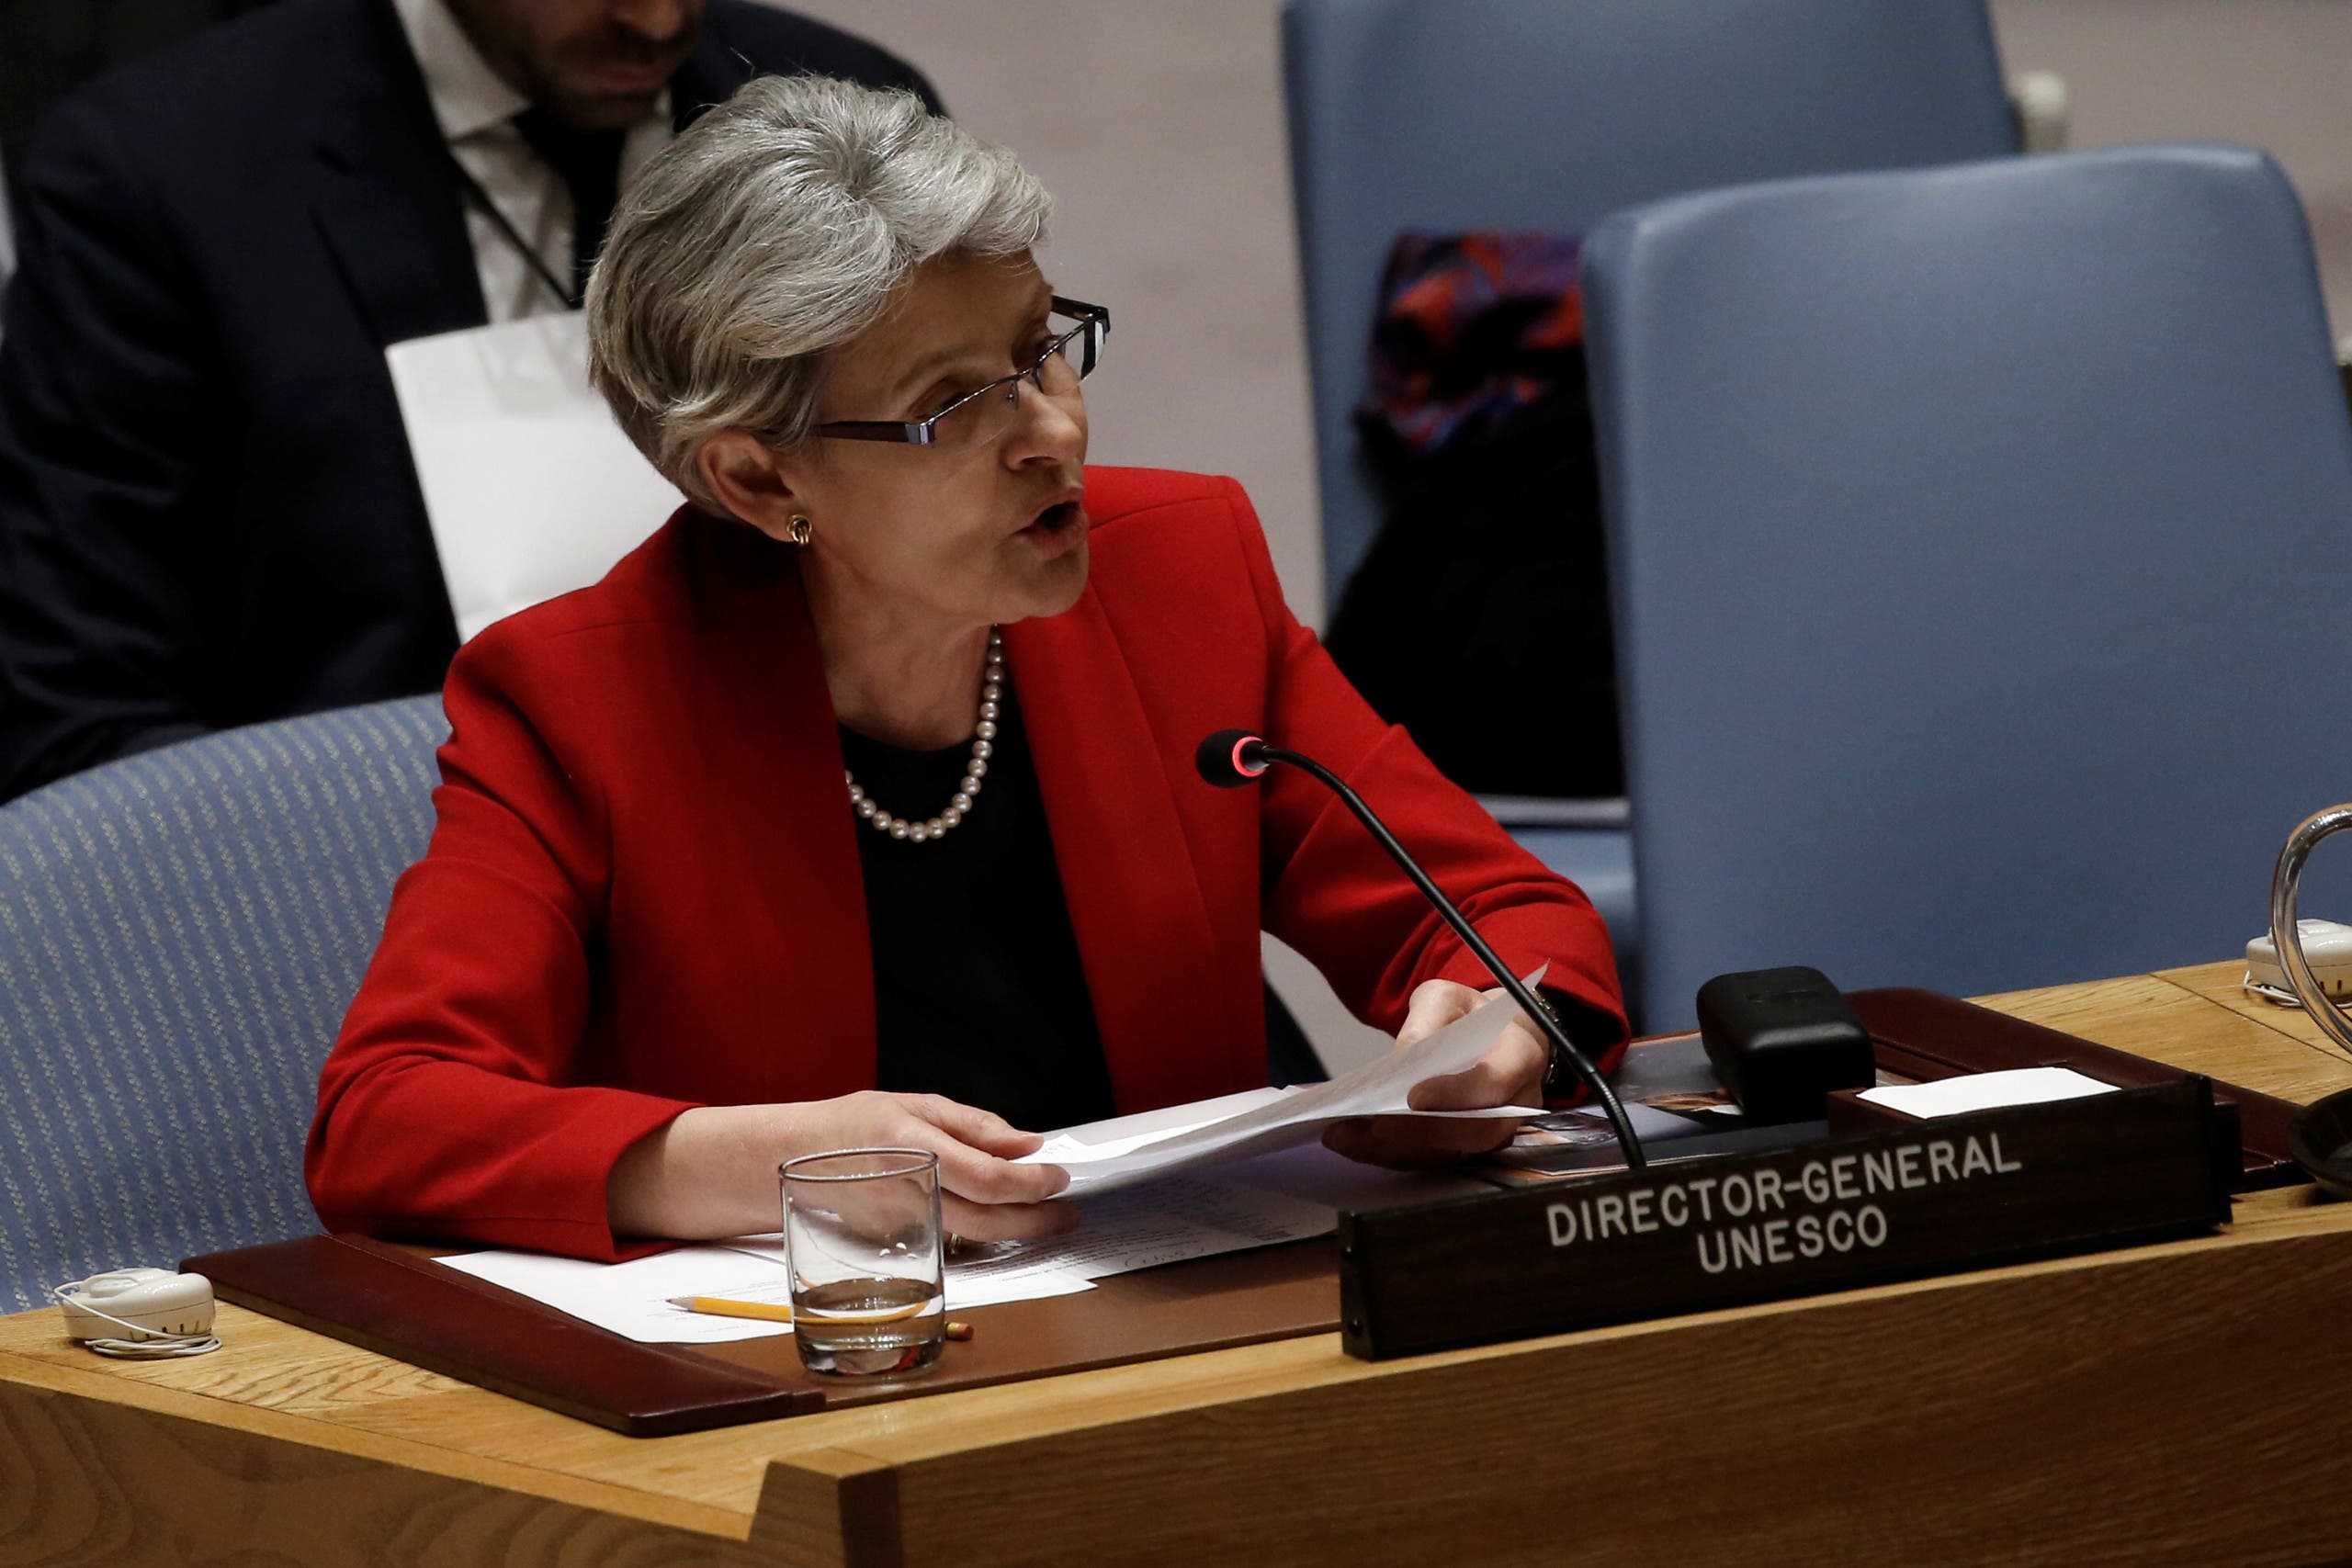 Irina Bokova, Director General of UNESCO, addresses the United Nations Security Council after the Council voted to adopt a resolution on the protection of cultural heritage in armed conflict at U.N. headquarters in New York City, New York, US, March 24, 2017. (File photo: Reuters)